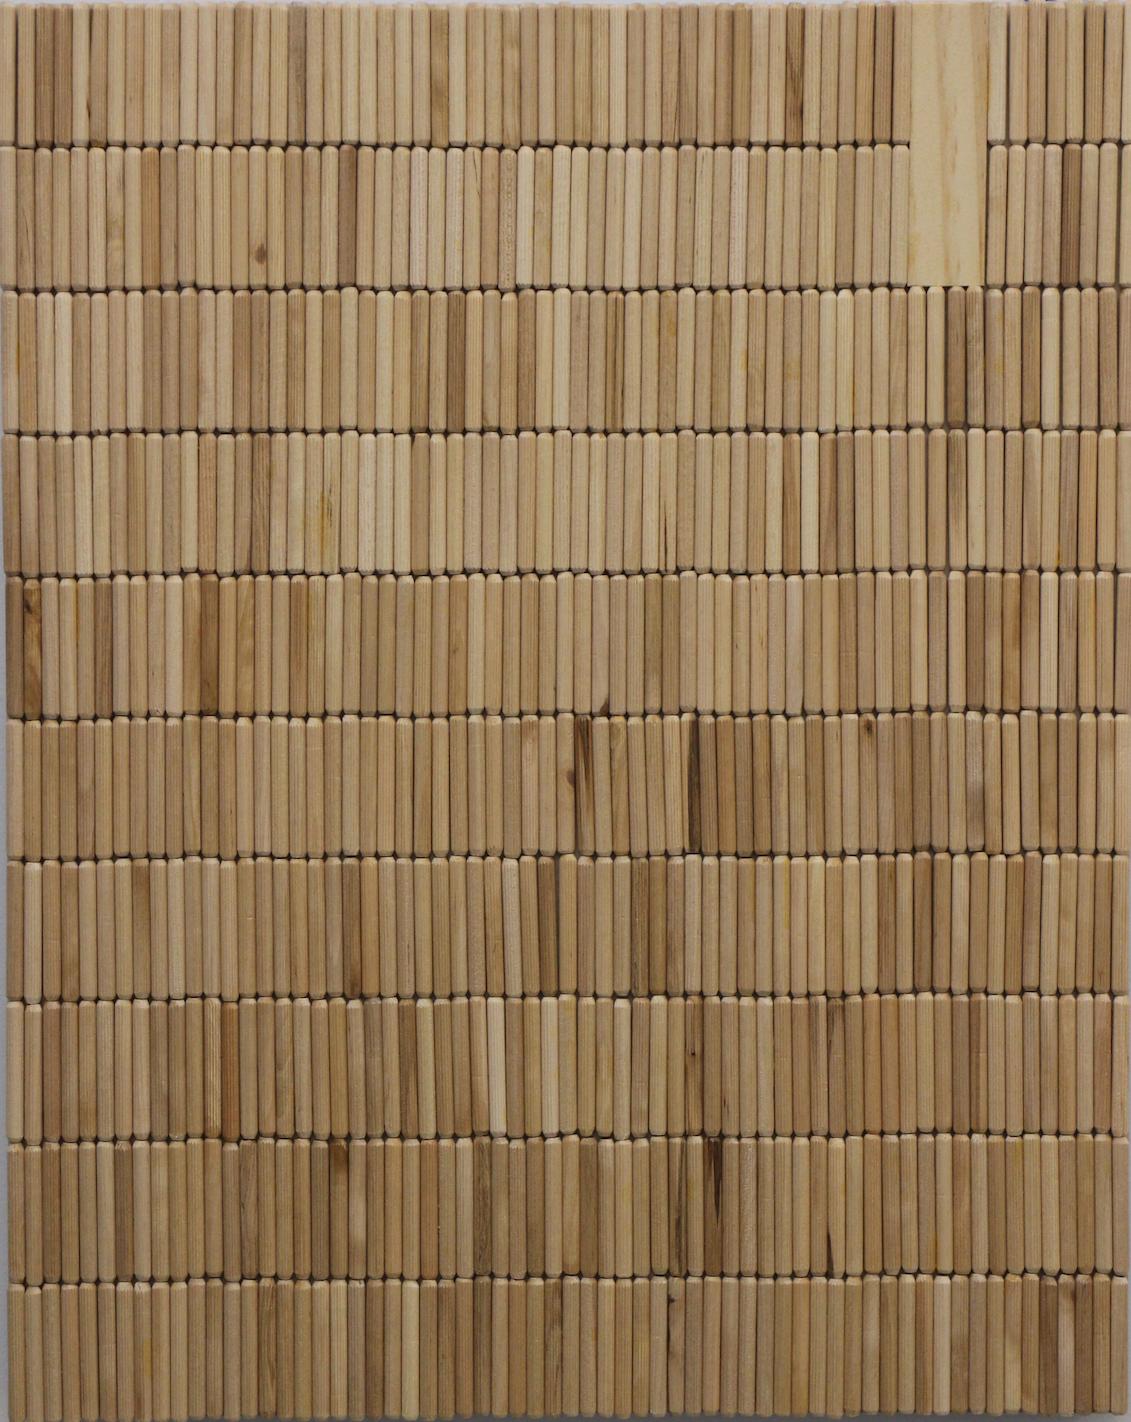 Jean Wolff Abstract Painting - Natural Rod Painting, Wood on panel Painting